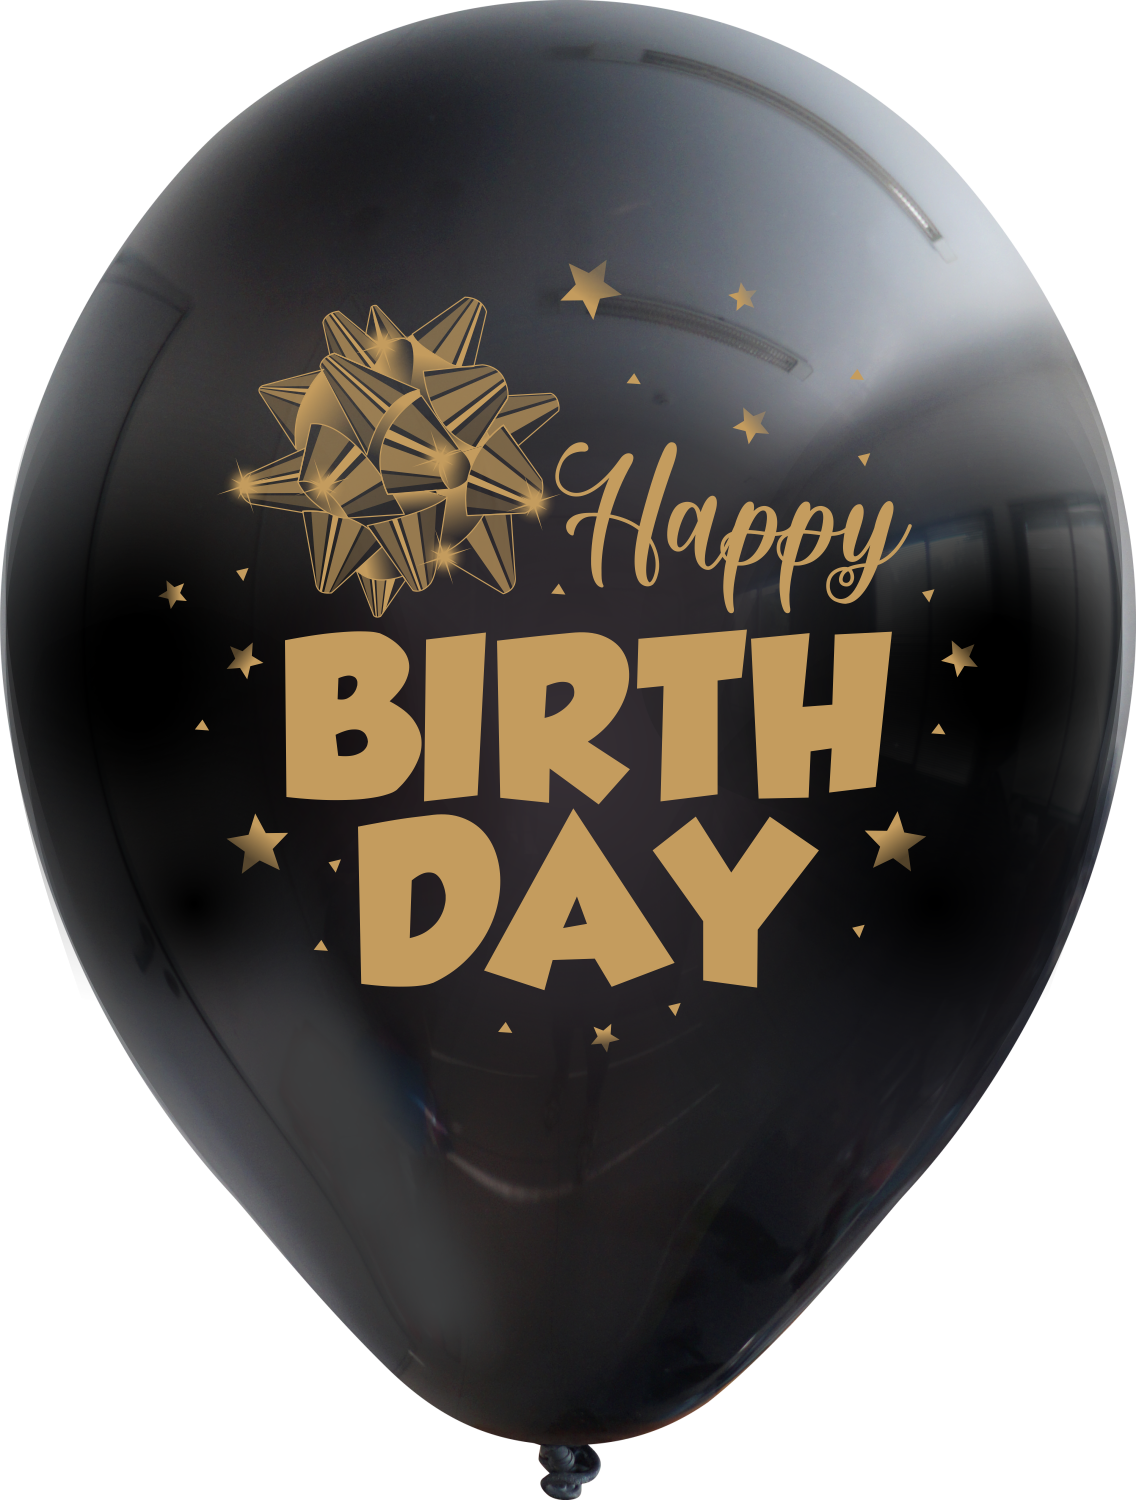 Transformers Happy Birthday 17" Foil Party Balloon 2 Sided Design 